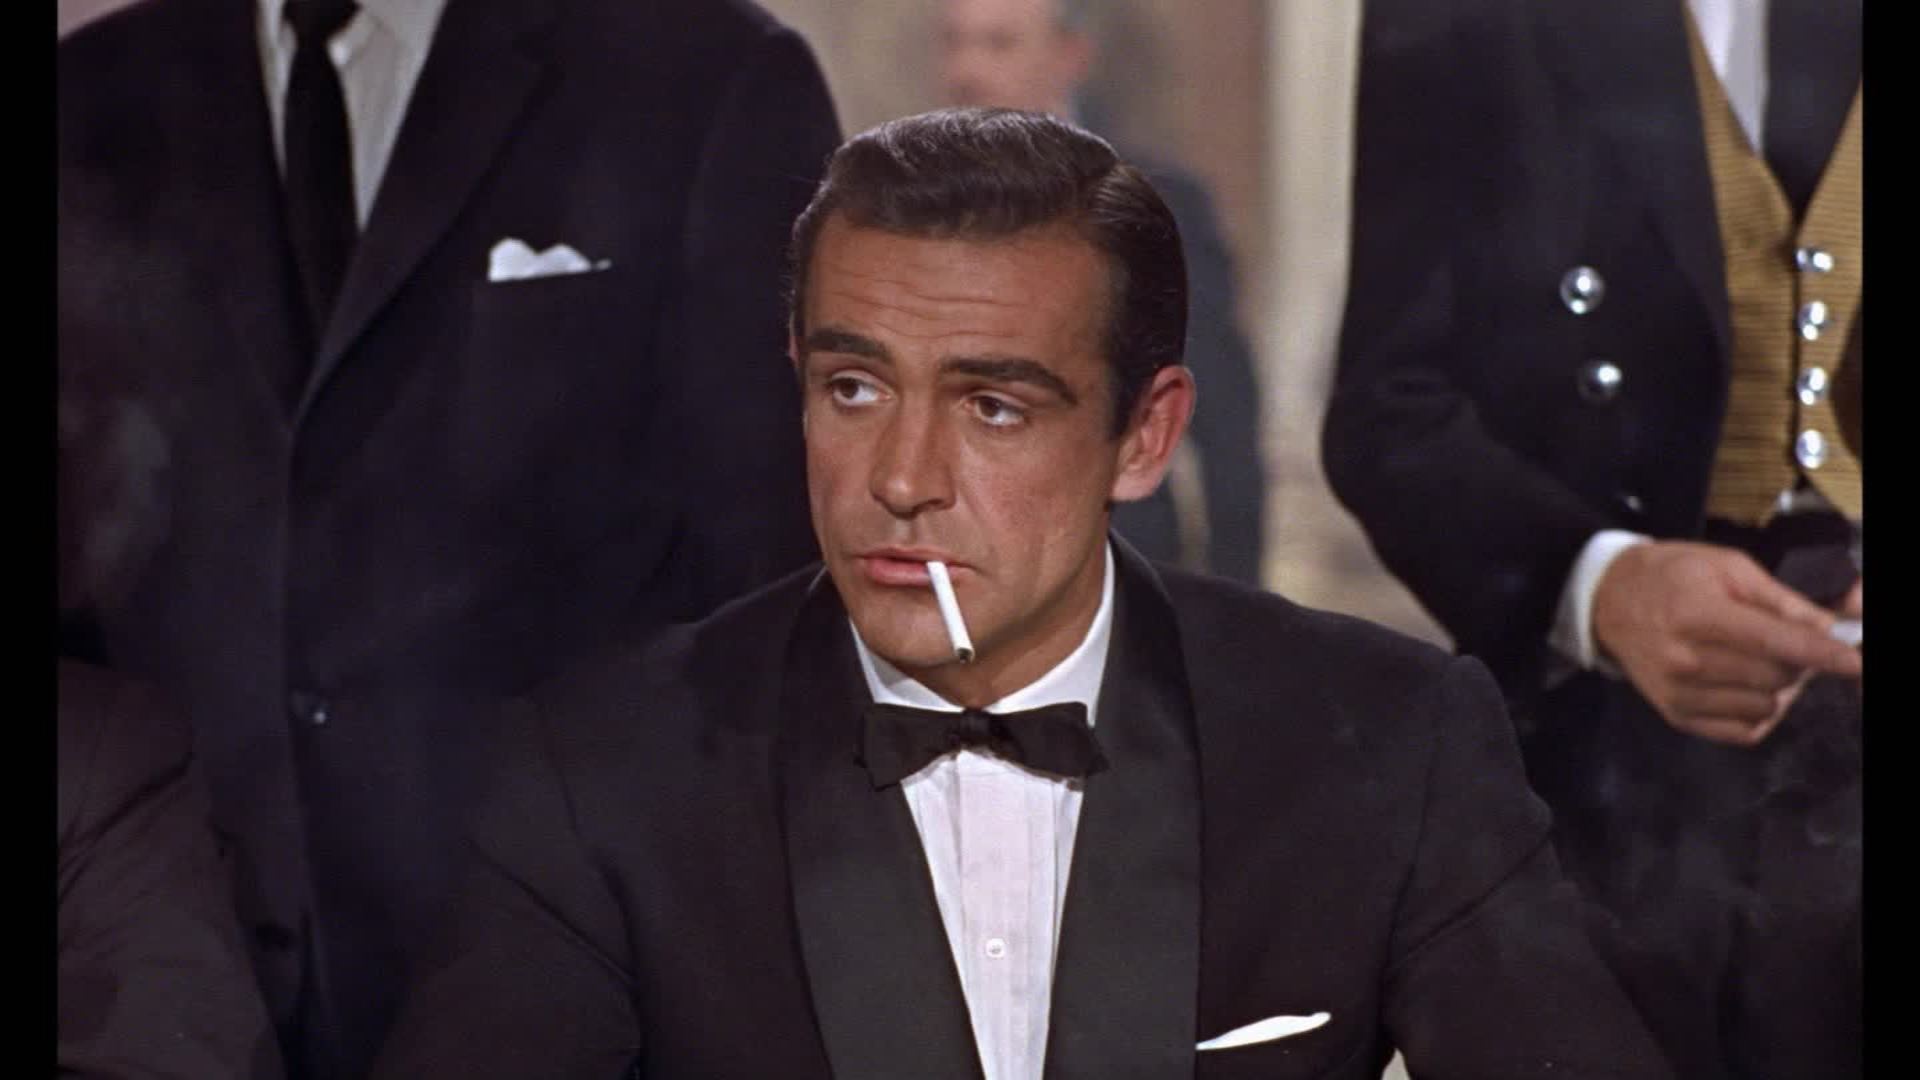 Sean Connery in Dr No